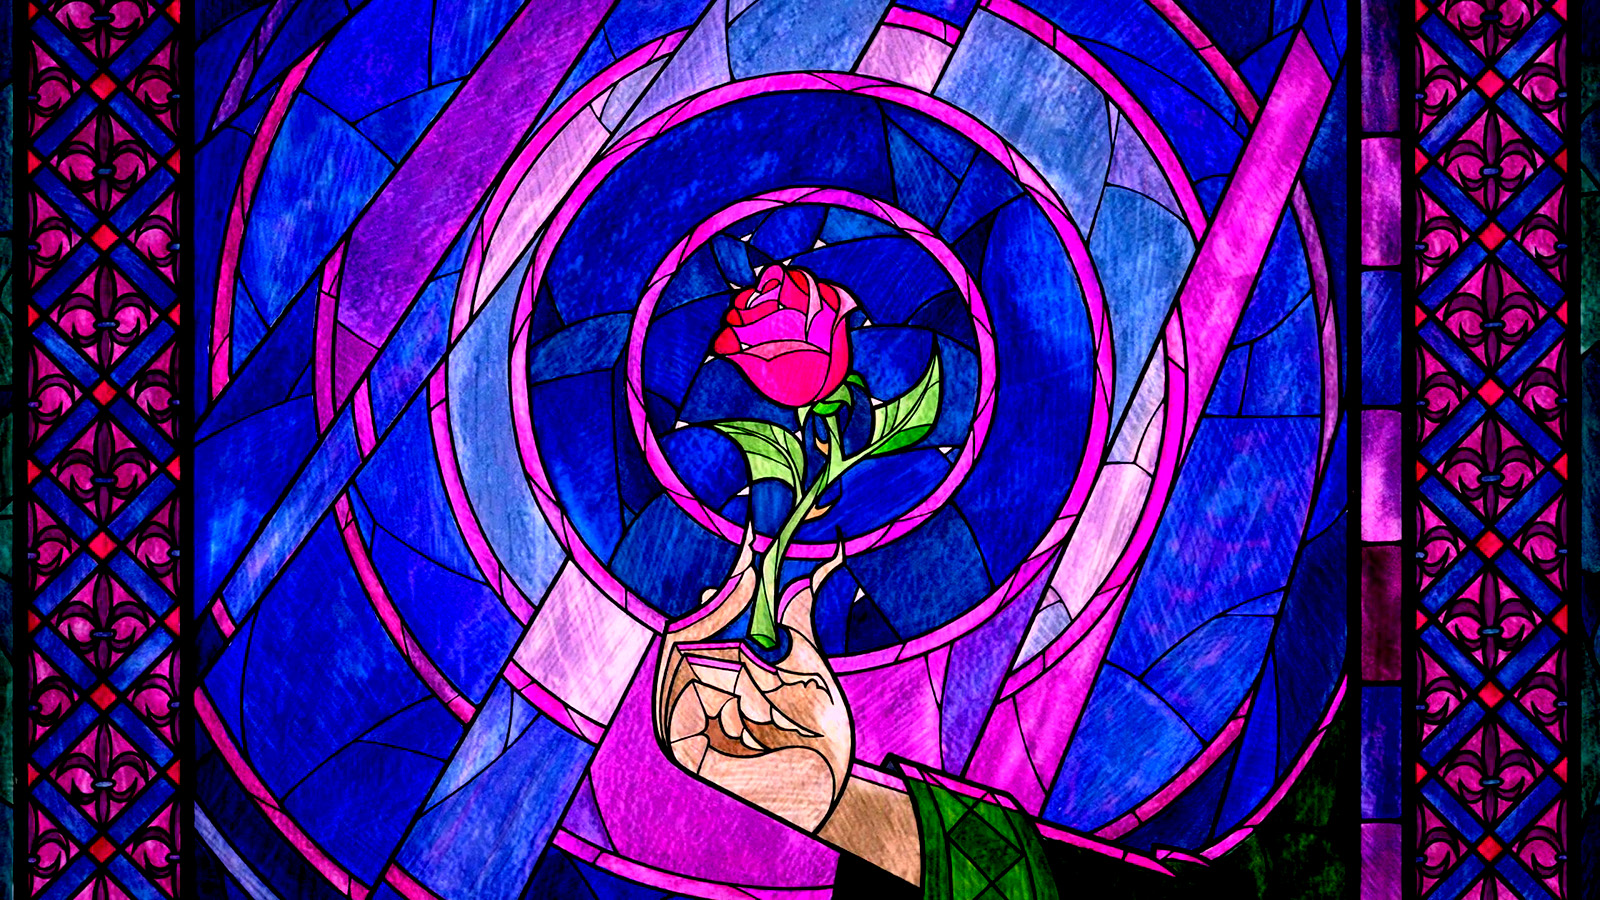 Stained Glass Wallpaper - Beauty And The Beast Disney Rose - HD Wallpaper 